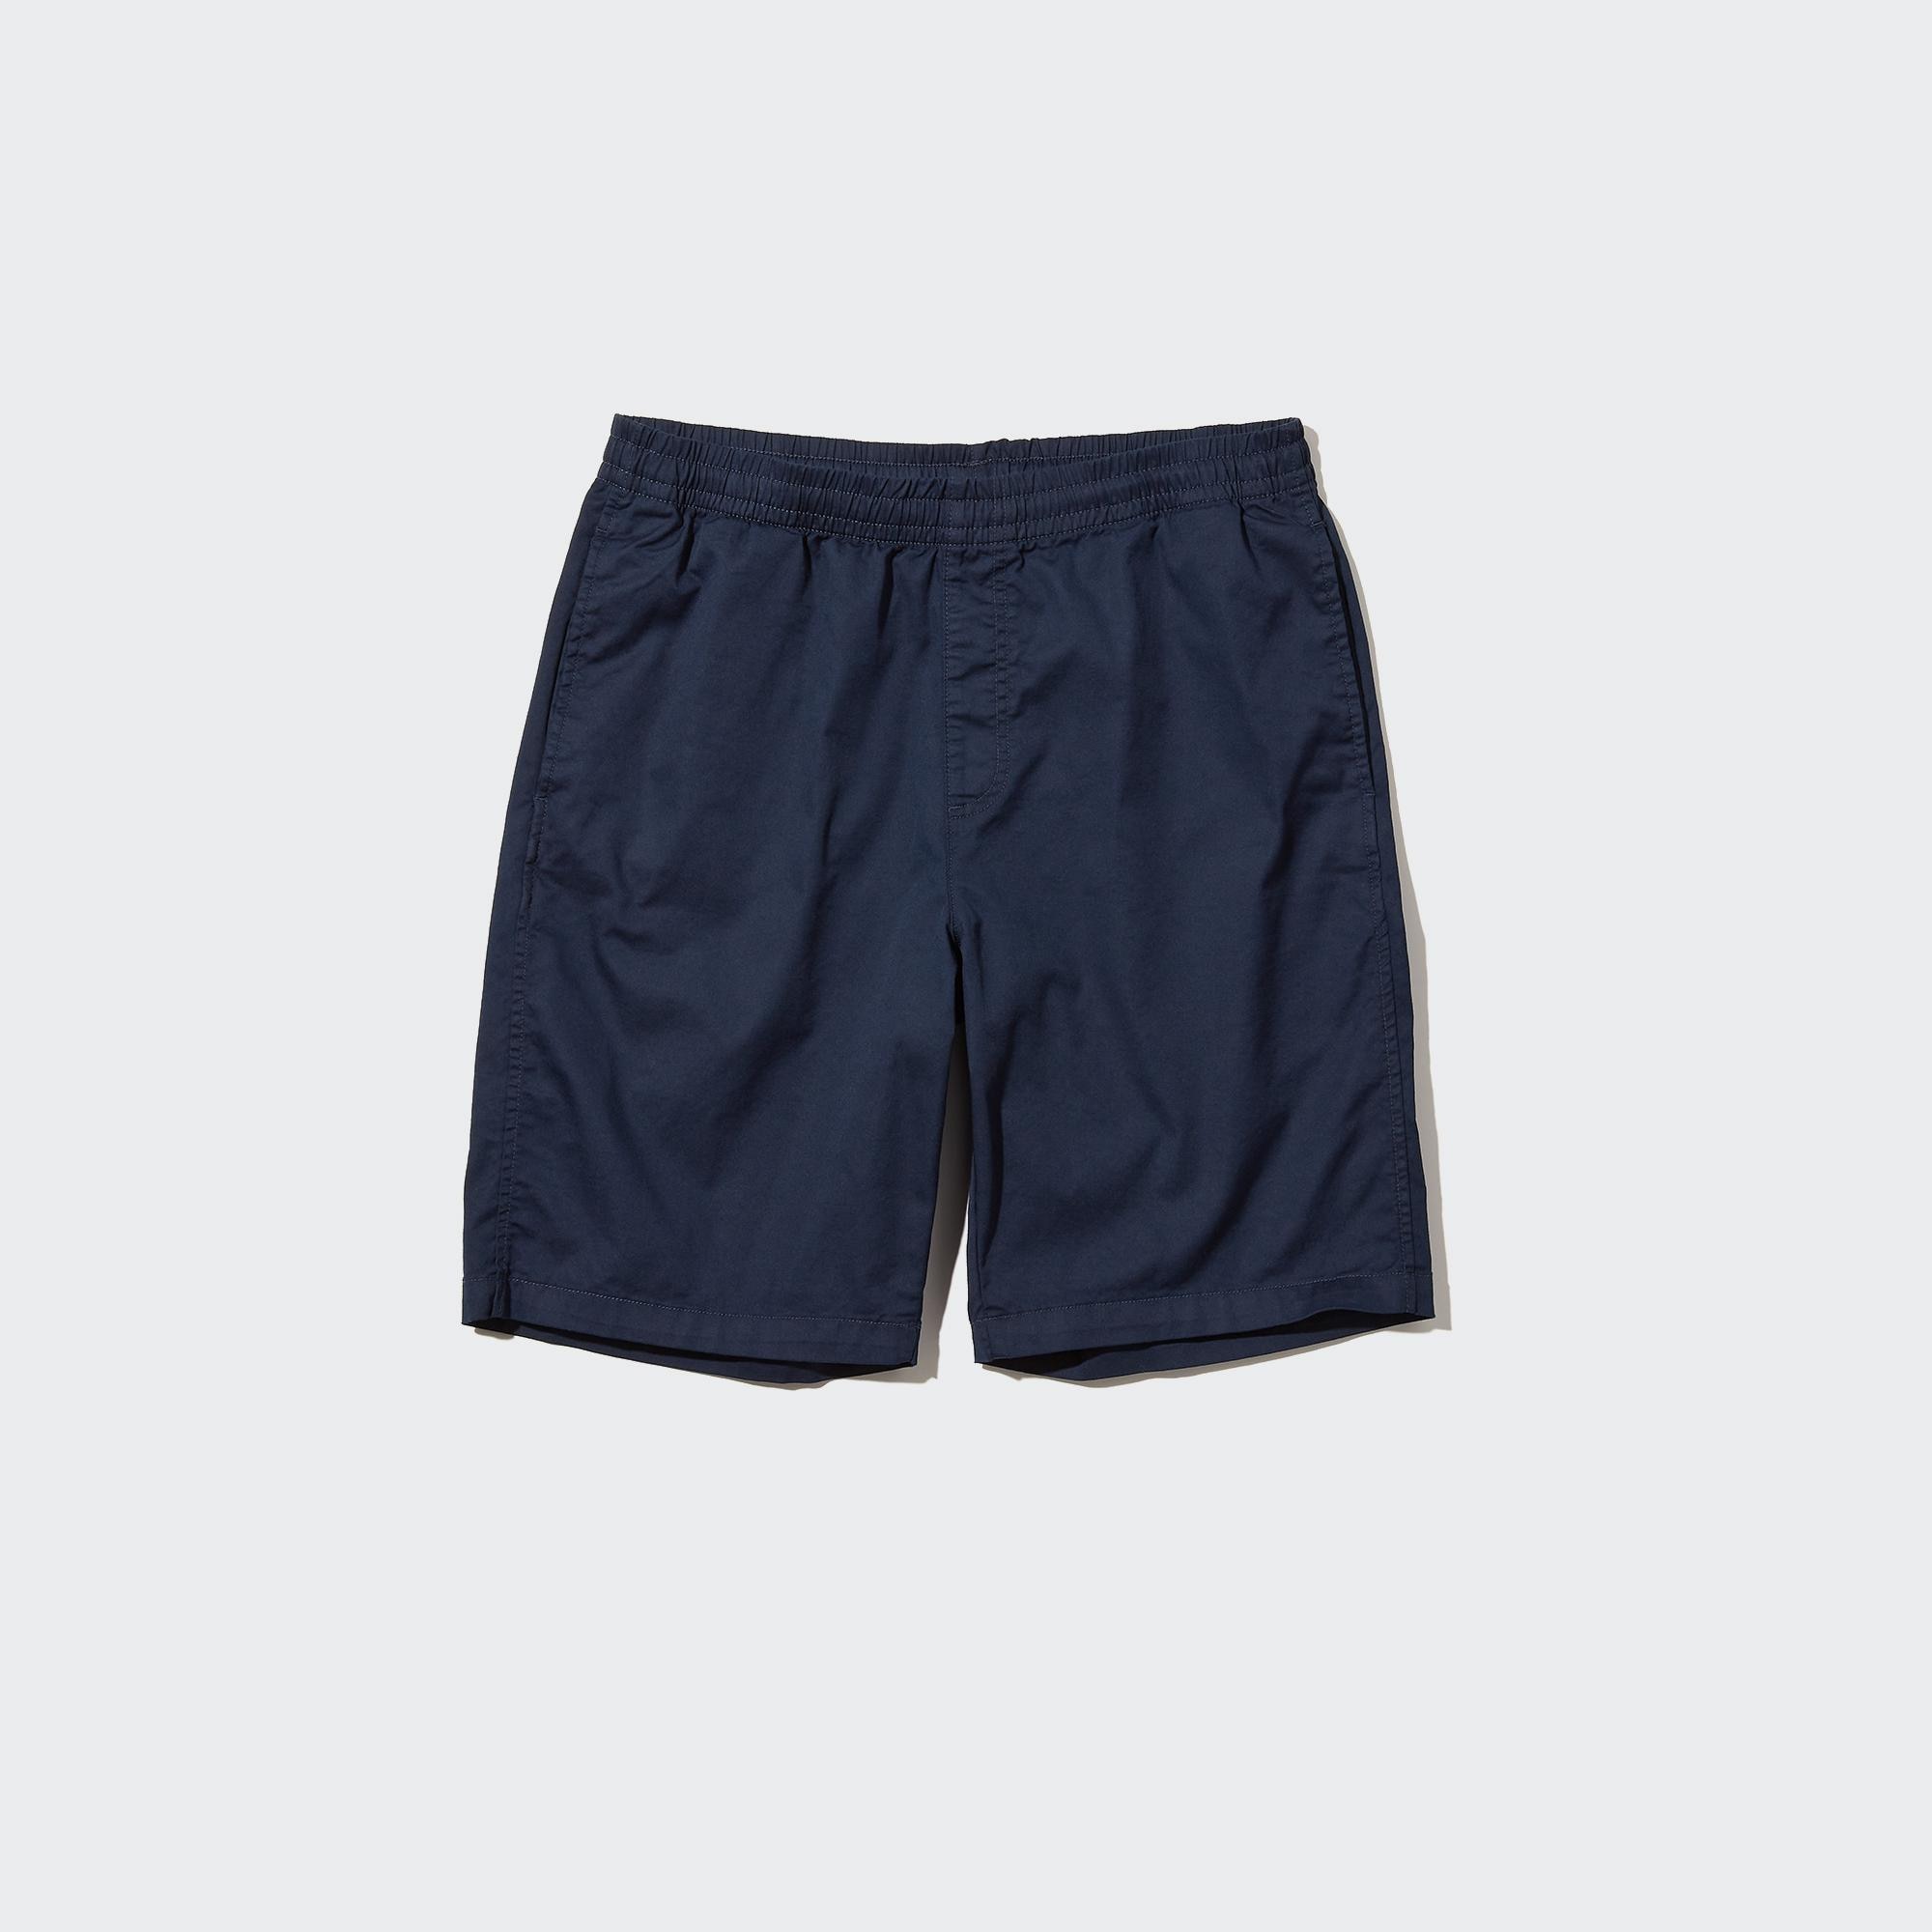 Mens SHORTSSleek designs  cool comfy lengthsUNIQLO OFFICIAL ONLINE  FLAGSHIP STORE